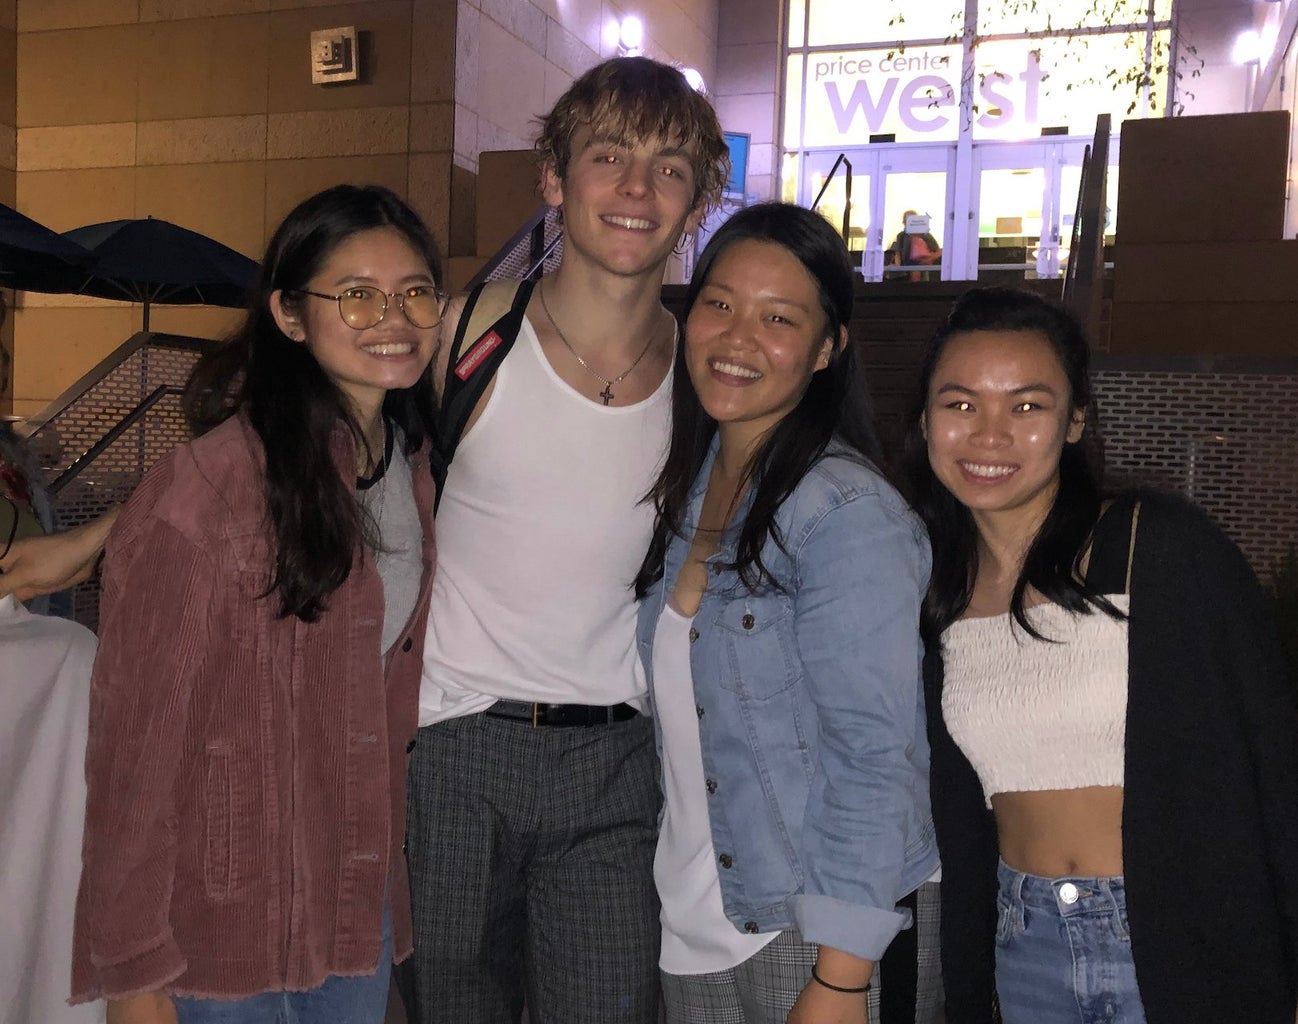 a picture with Ross Lynch